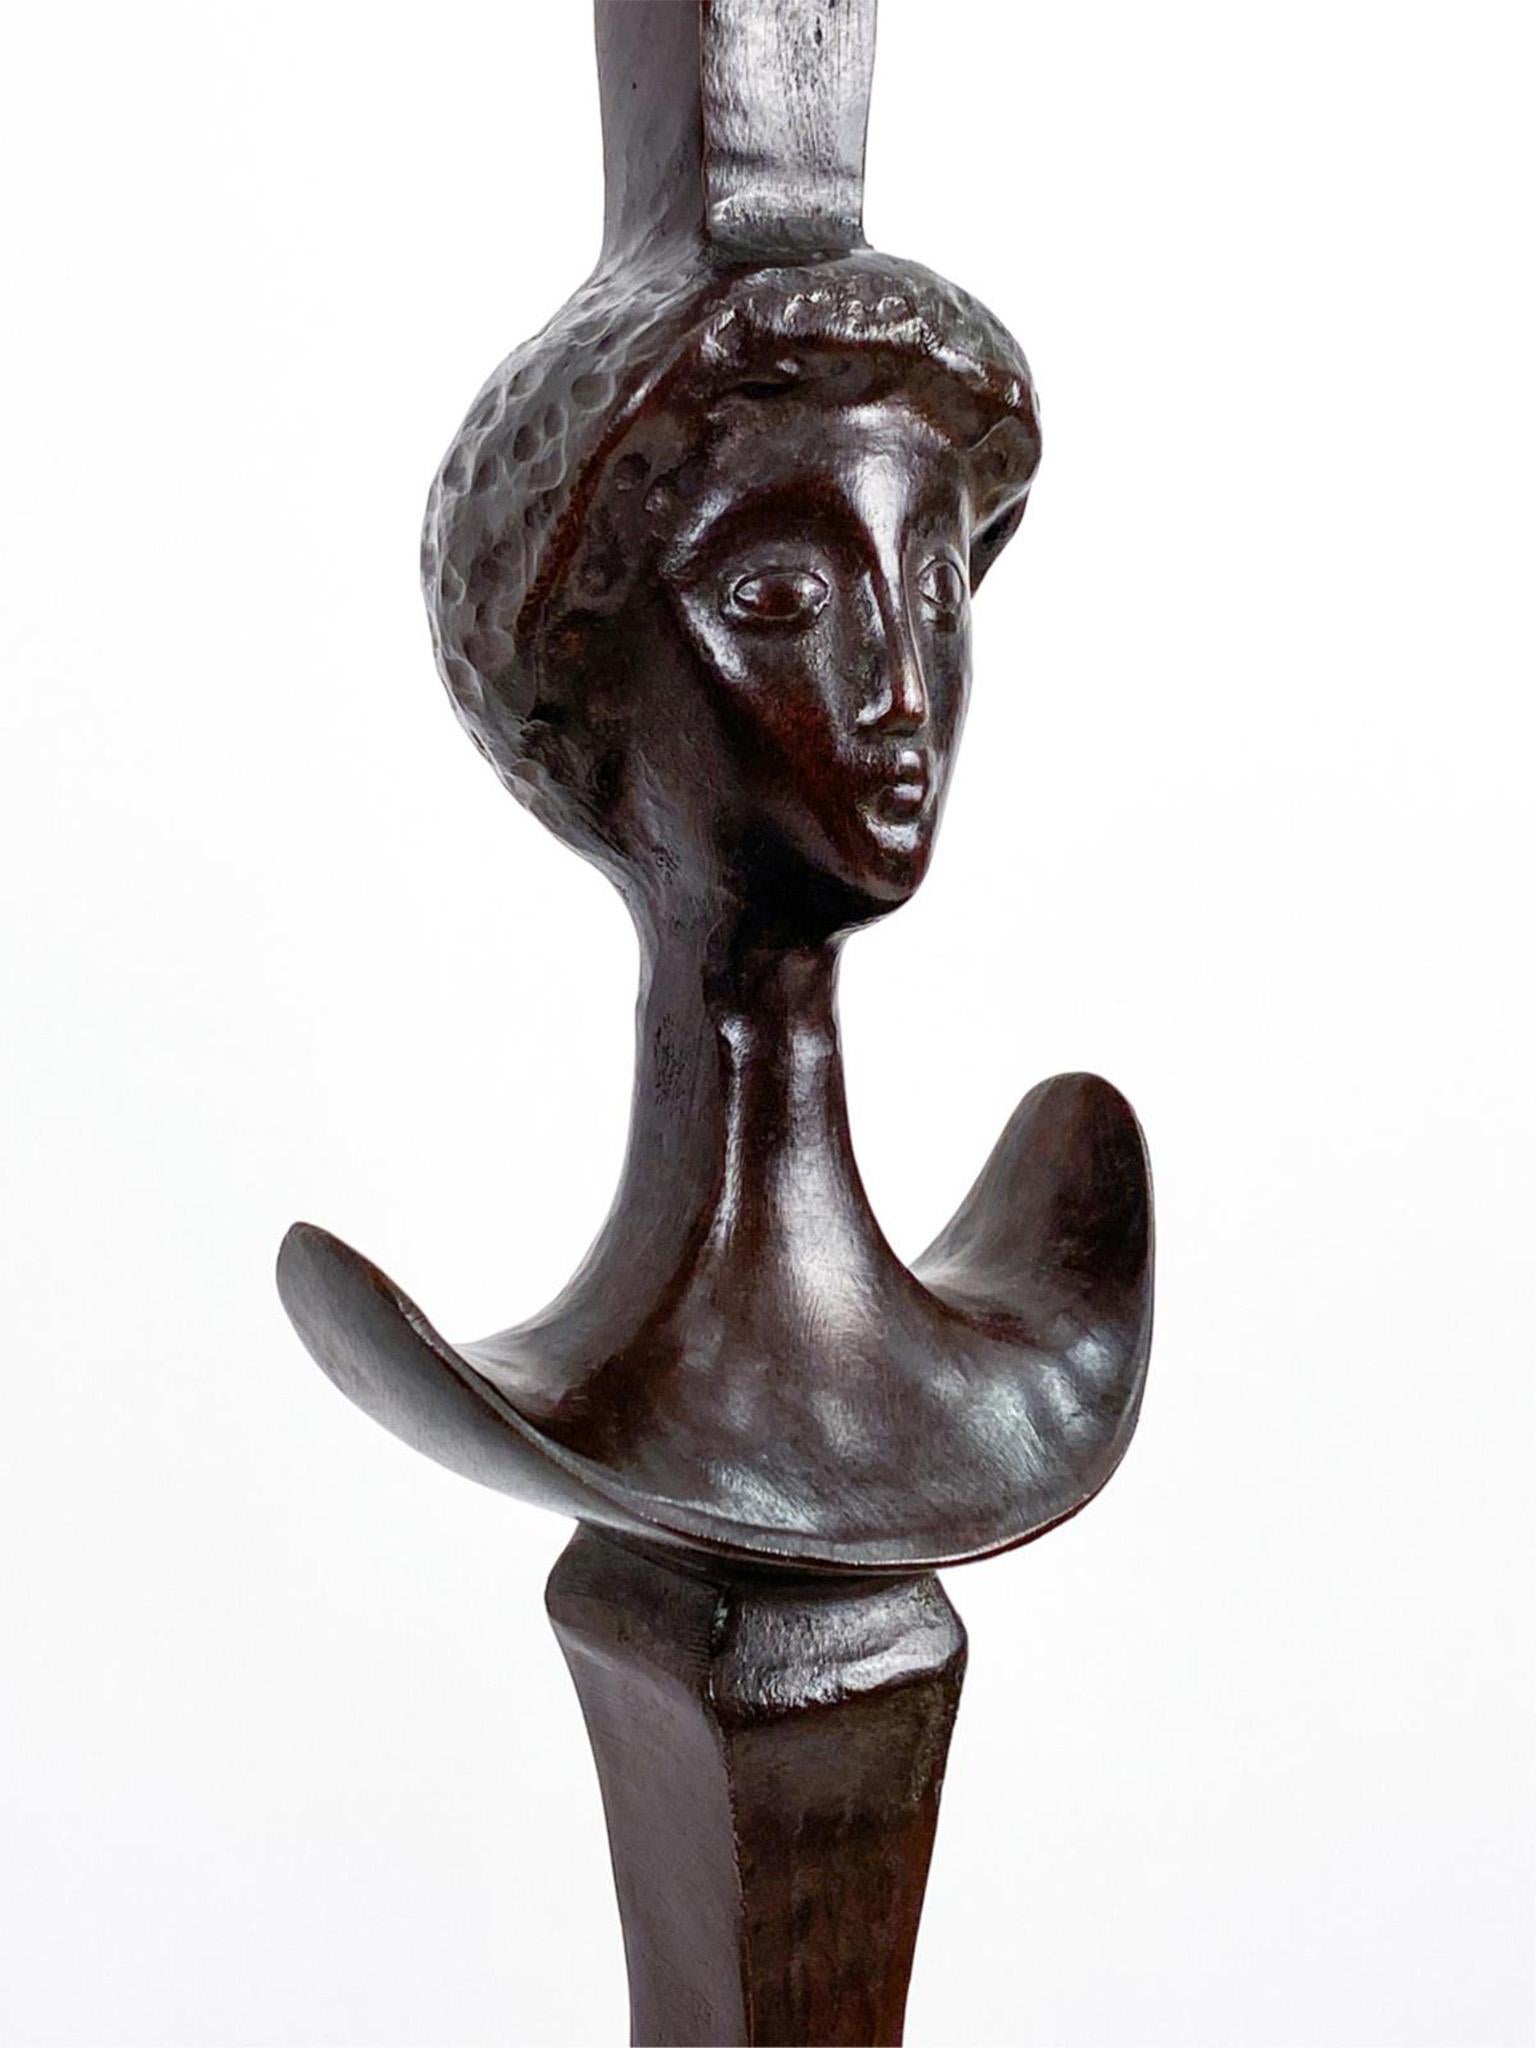 This absolutely stunning Bronze floor lamp was designed in the style of preeminent Modernist sculptor Alfred Giacometti. It is constructed in a dark brown patinated bronze, showcasing a sculptural form of woman's head that is full of expression, and